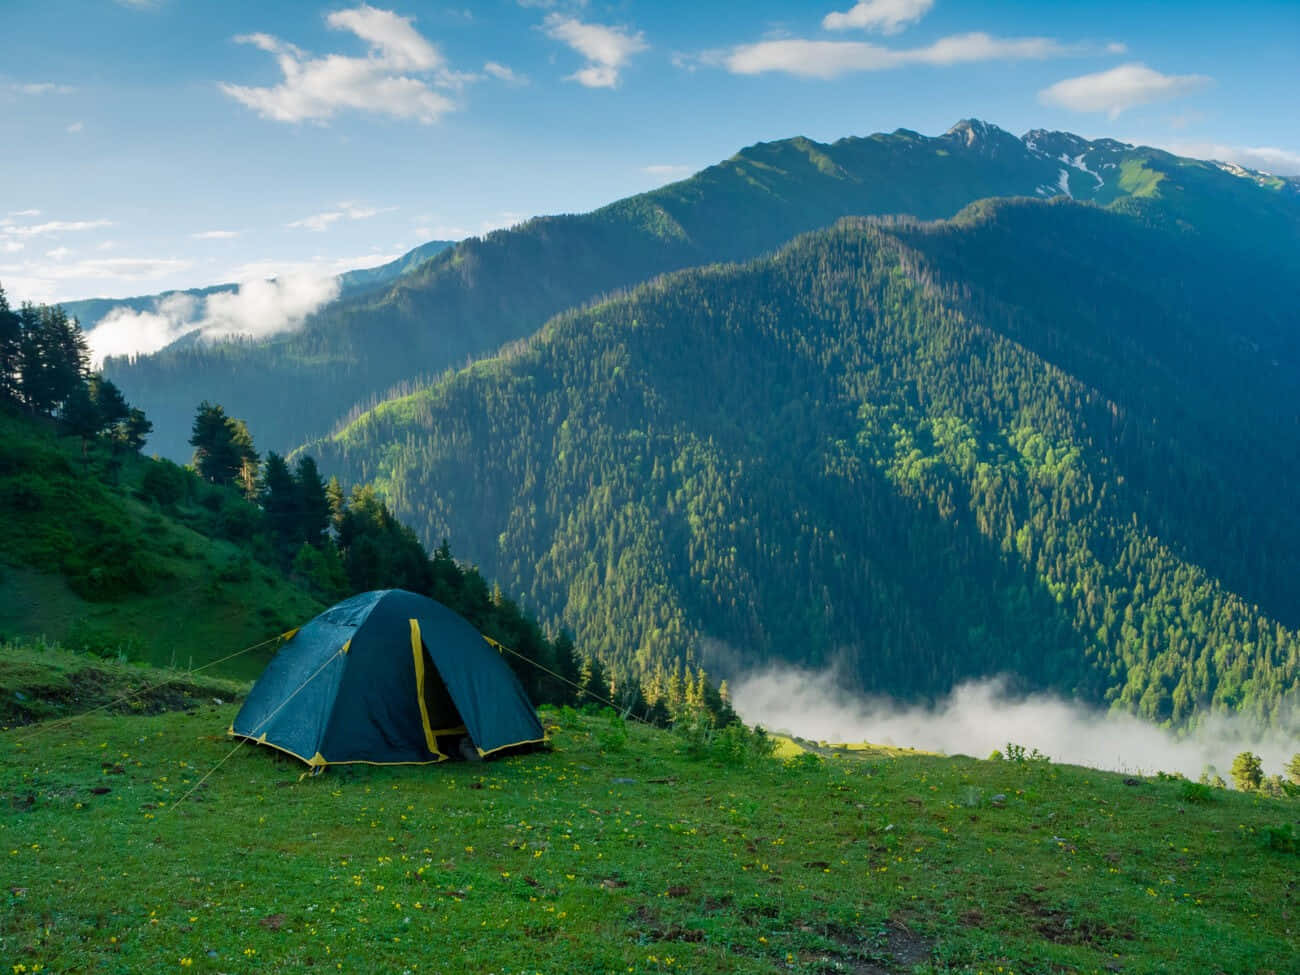 Enjoy the beauty of nature while camping in the great outdoors